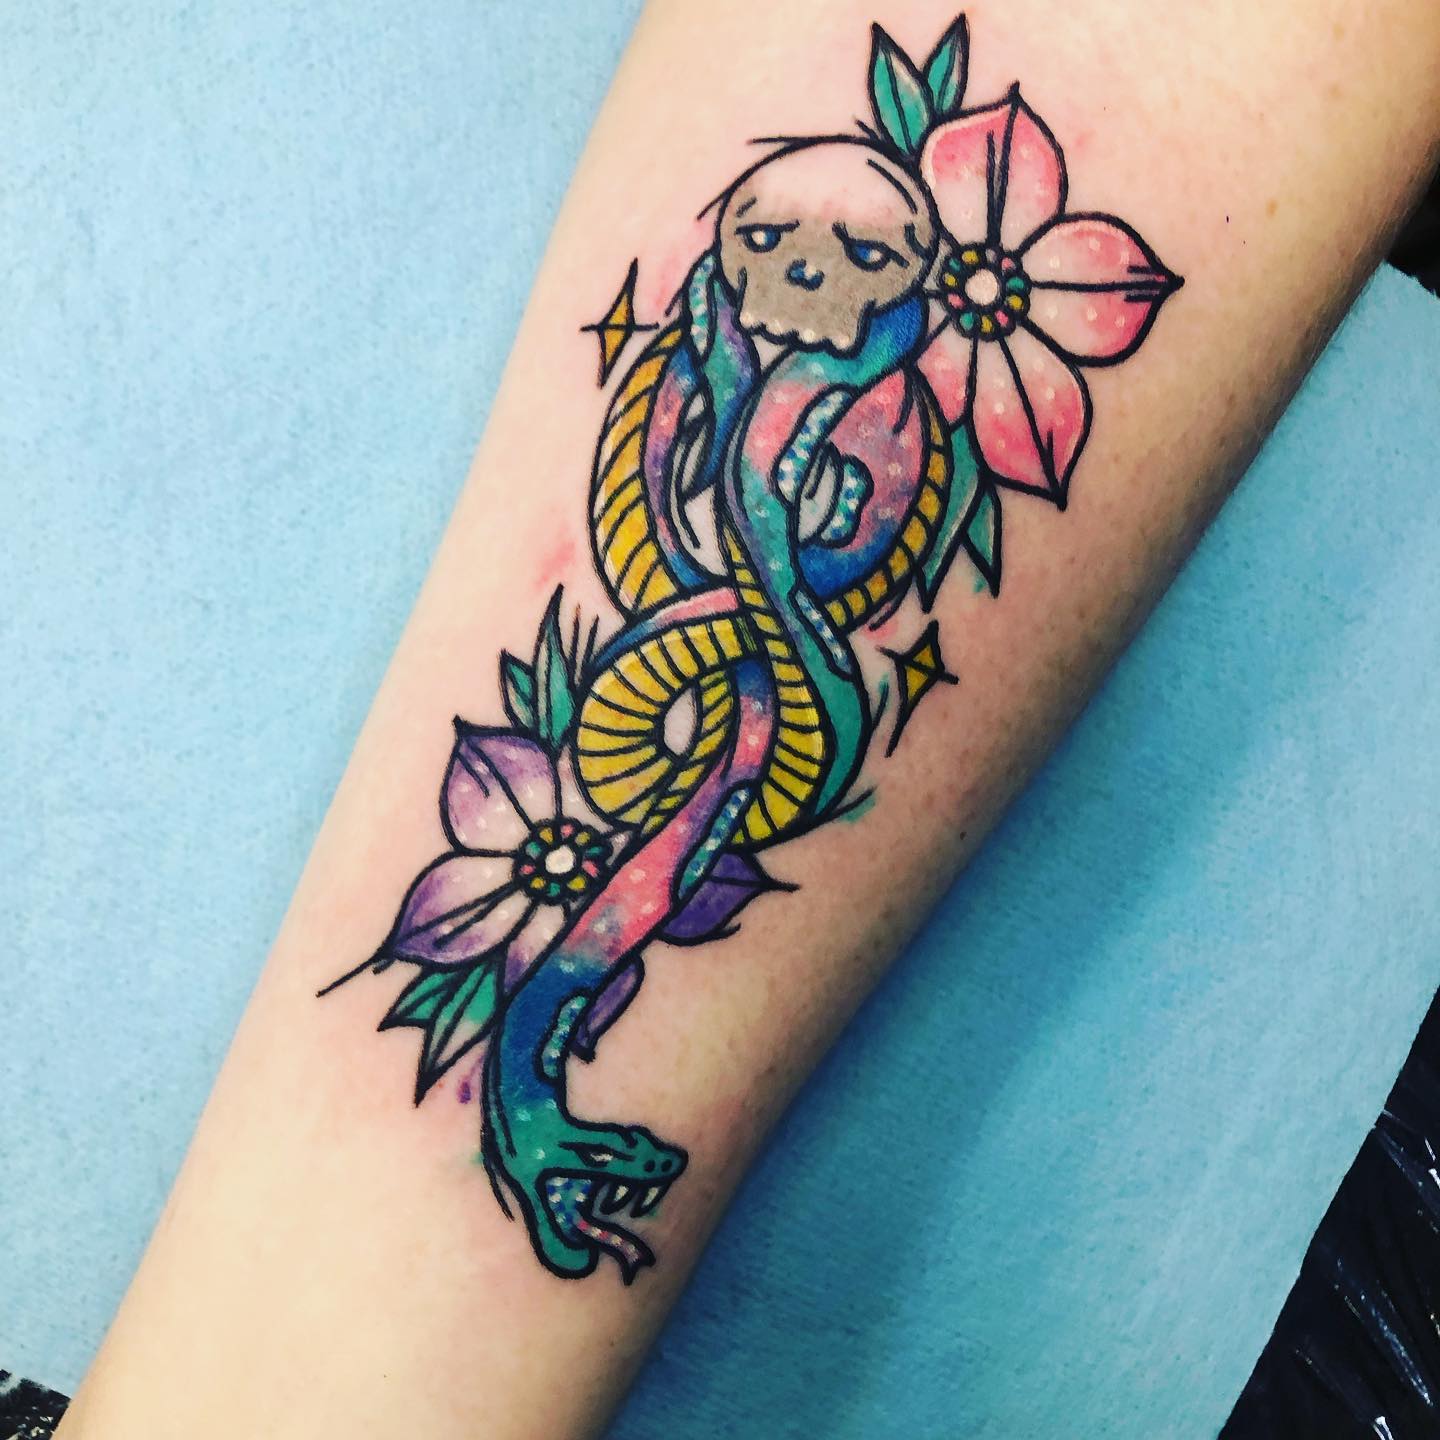 What a cool and colorful tattoo! The floral theme is really beautiful and well-executed, and it is nice to see how the Death Eater logo can be transformed into something unique and sweet like this.